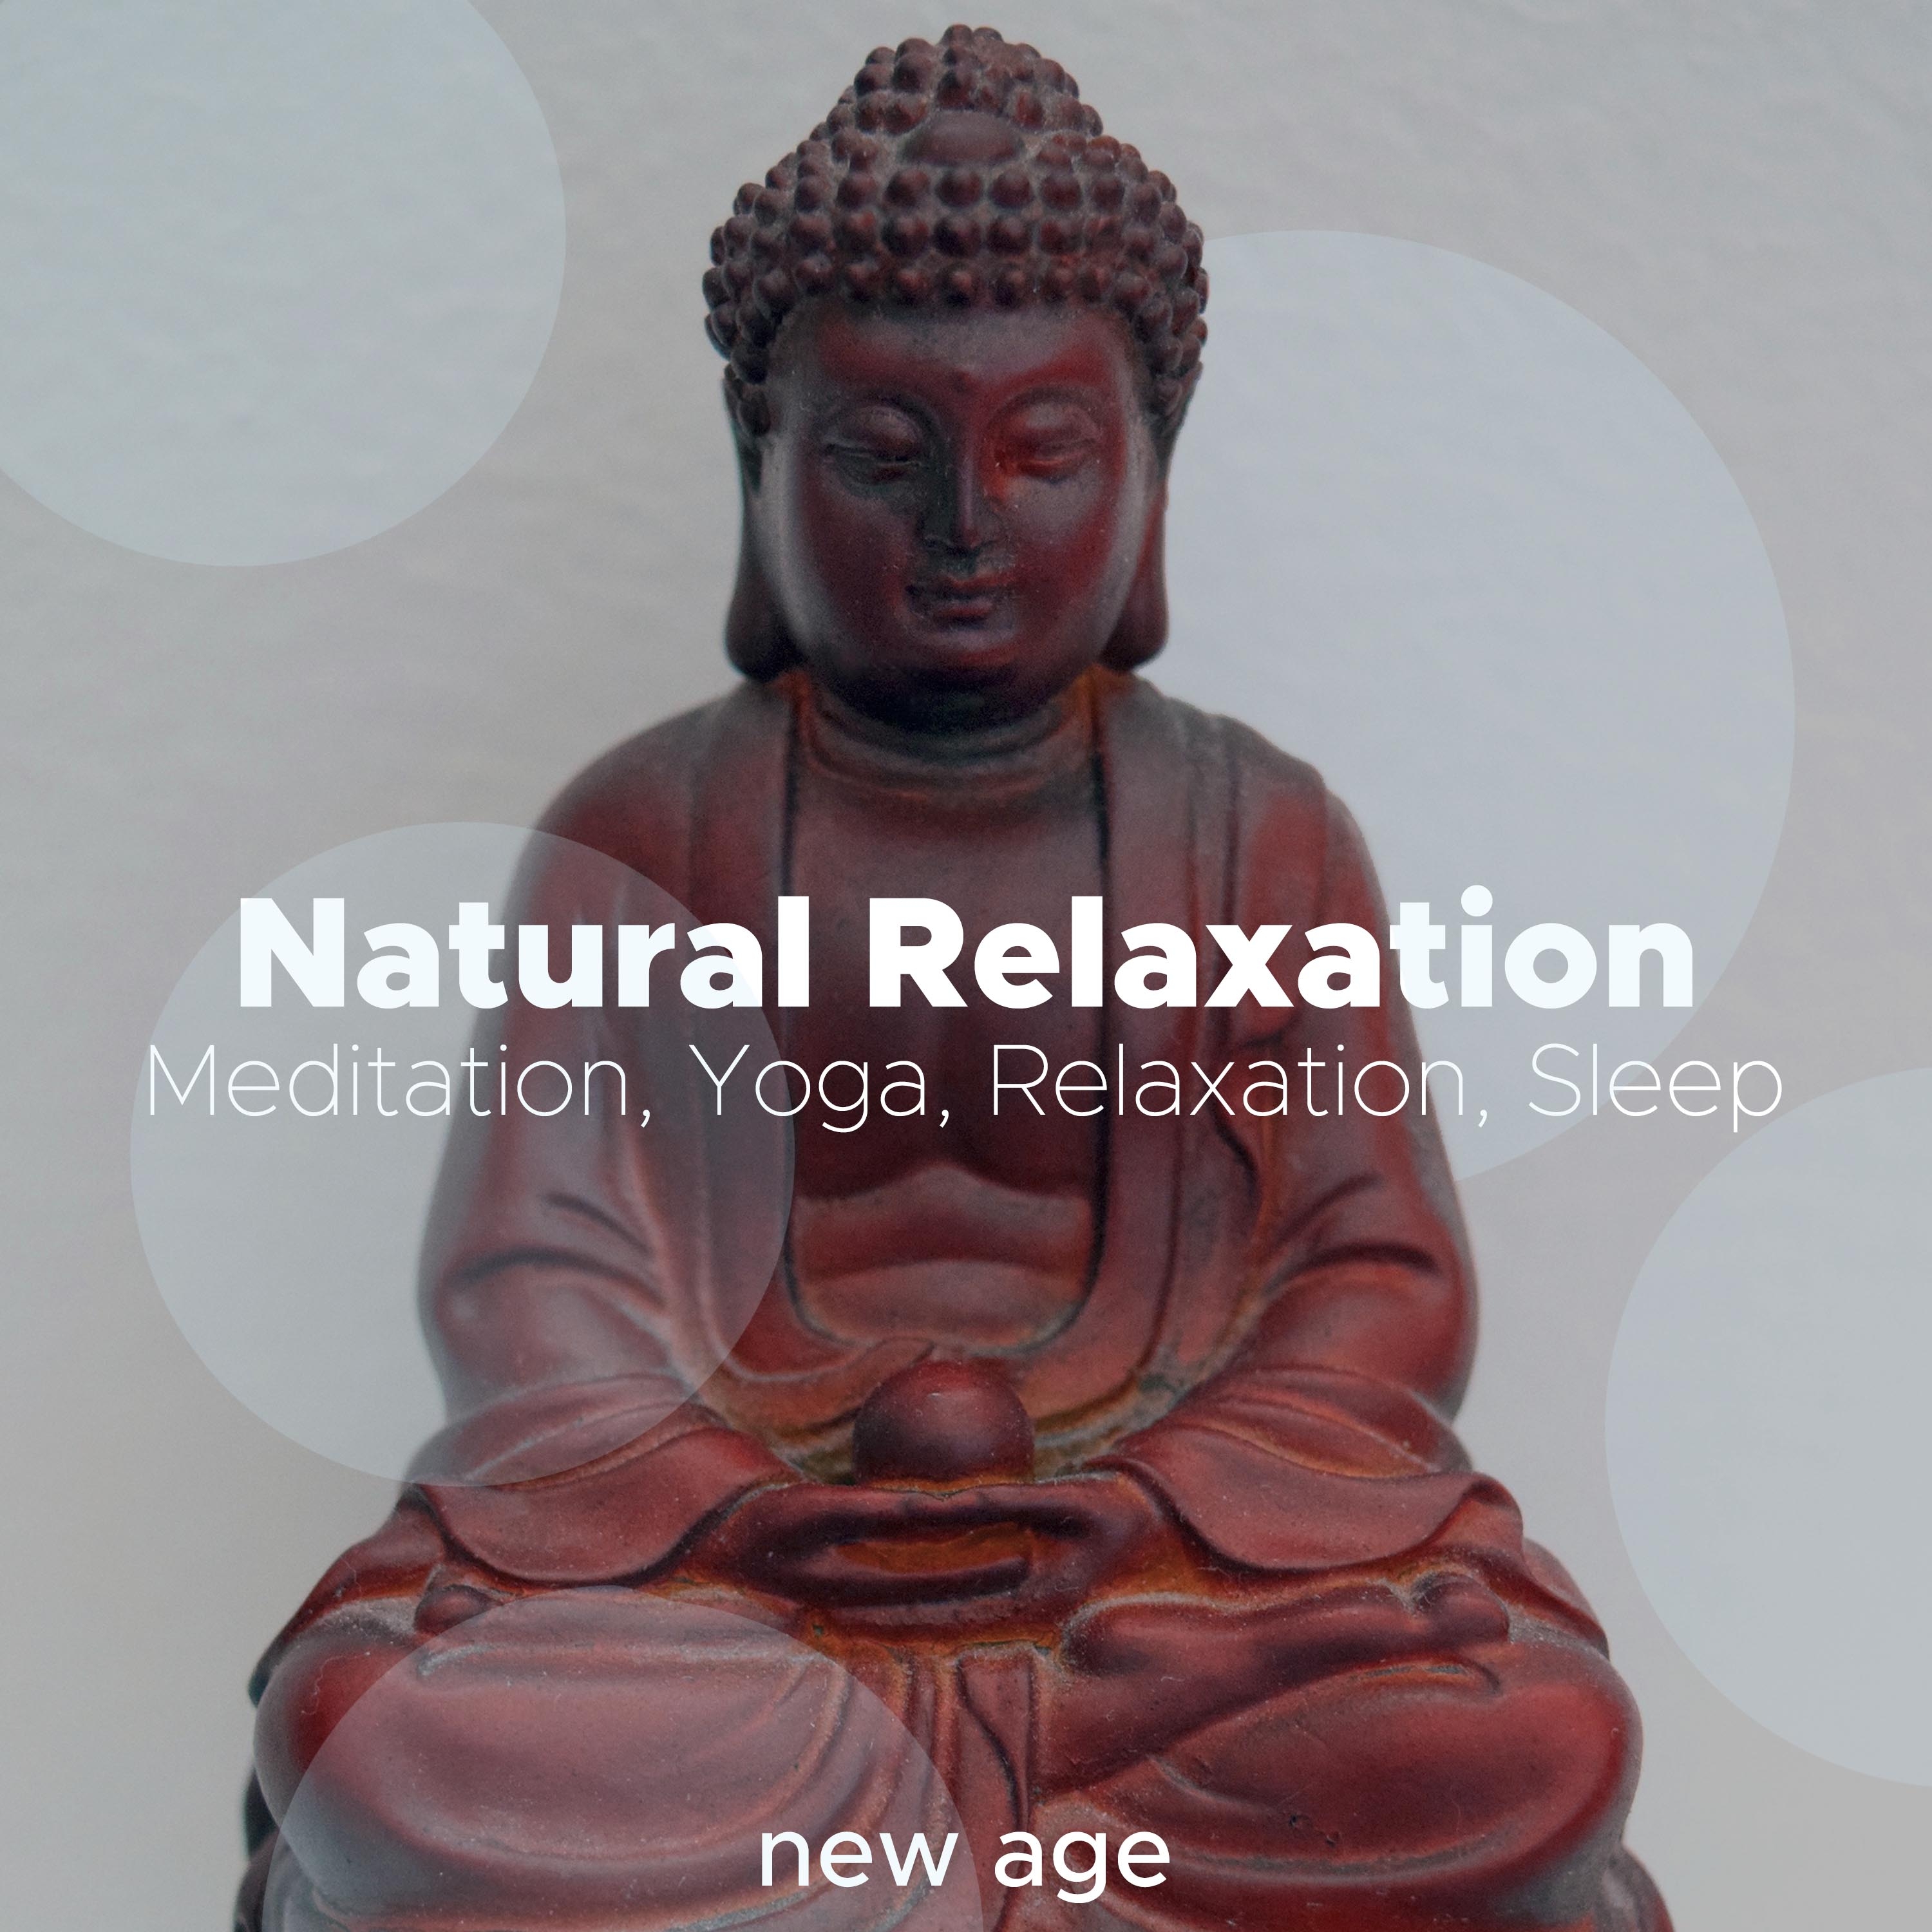 Natural Relaxation - Relaxing Instrumental Blissful Music for Meditation, Yoga, Relaxation, Sleep